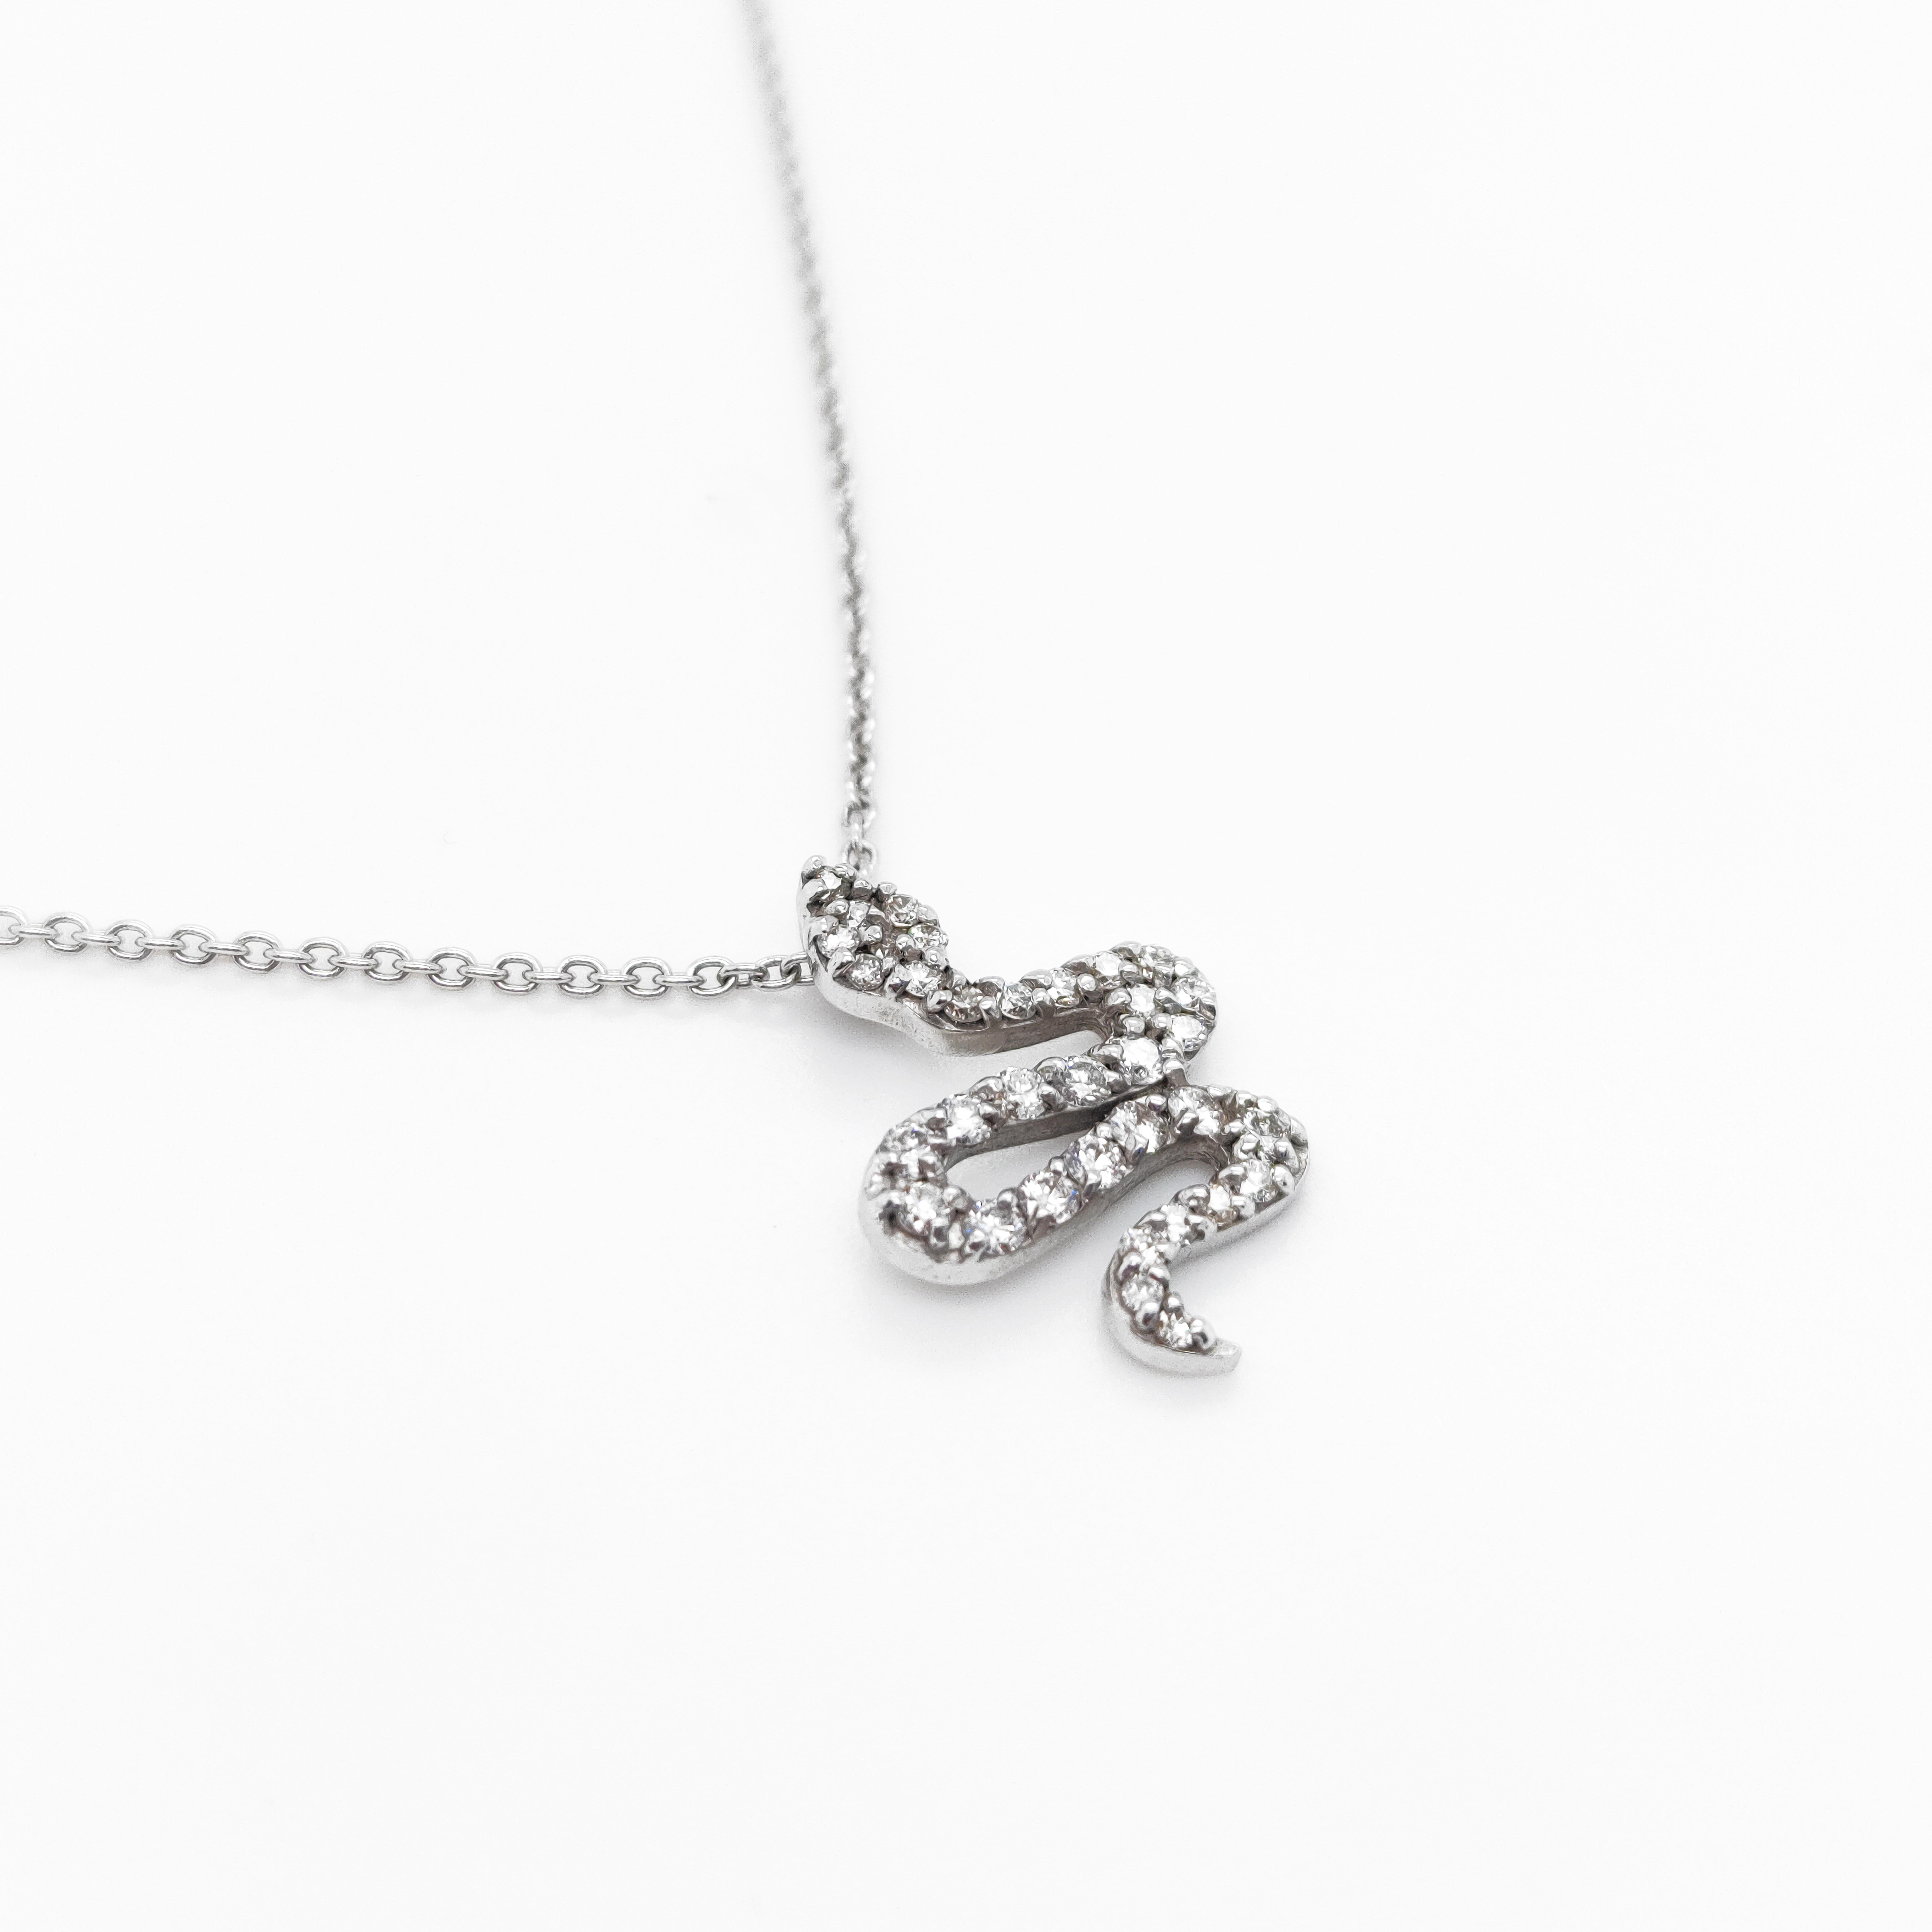 This 18KT White gold & diamonds snake necklace is a statement piece that will instantly elevate any outfit. 
The snake design adds a touch of uniqueness and symbolism to the necklace. Snakes are often associated with transformation, rebirth, and